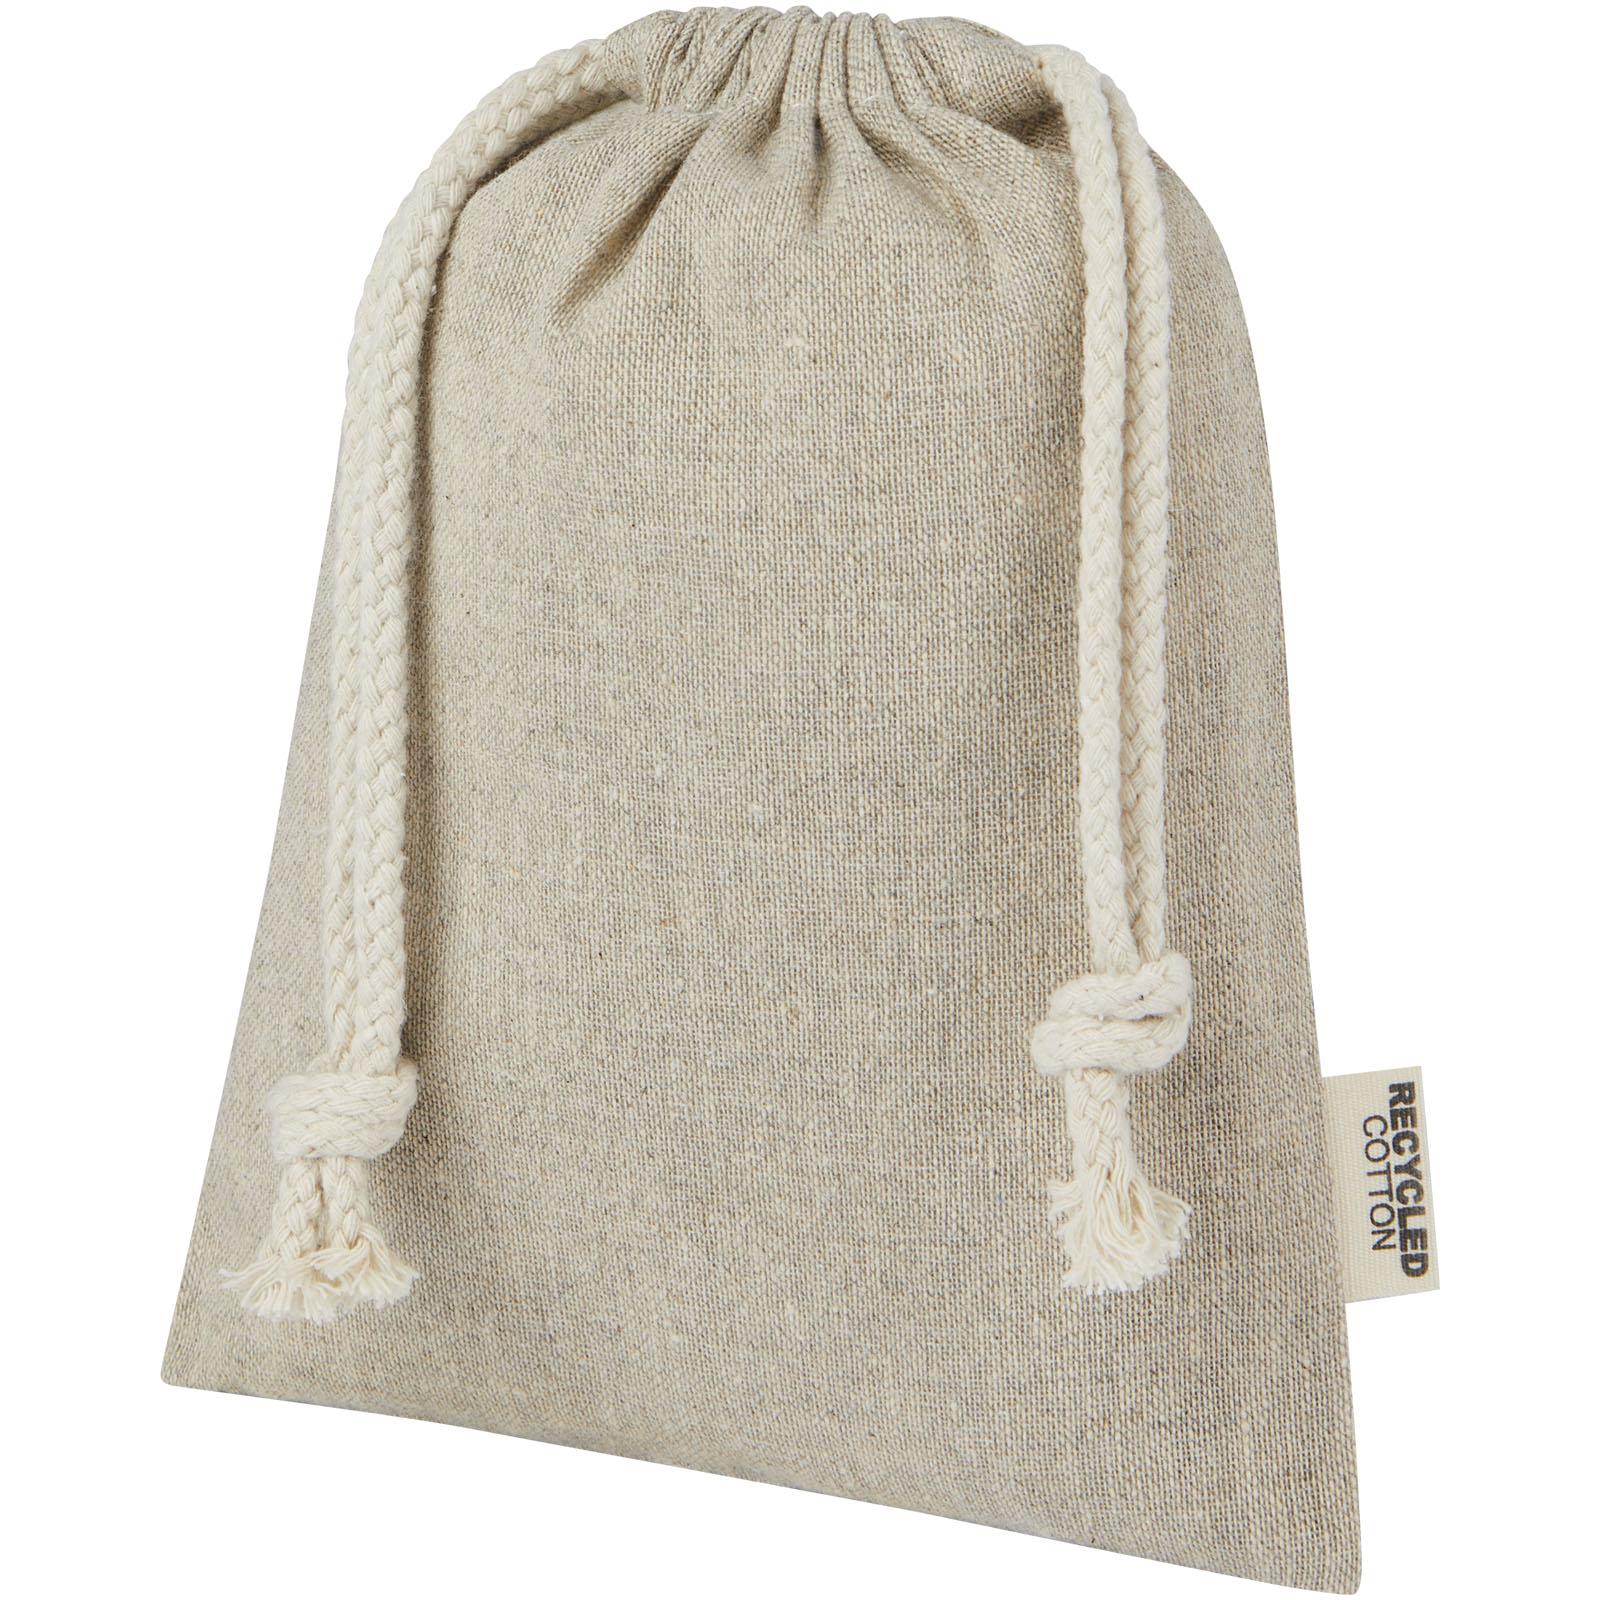 Cotton Bags - Pheebs 150 g/m² GRS recycled cotton gift bag small 0.5L